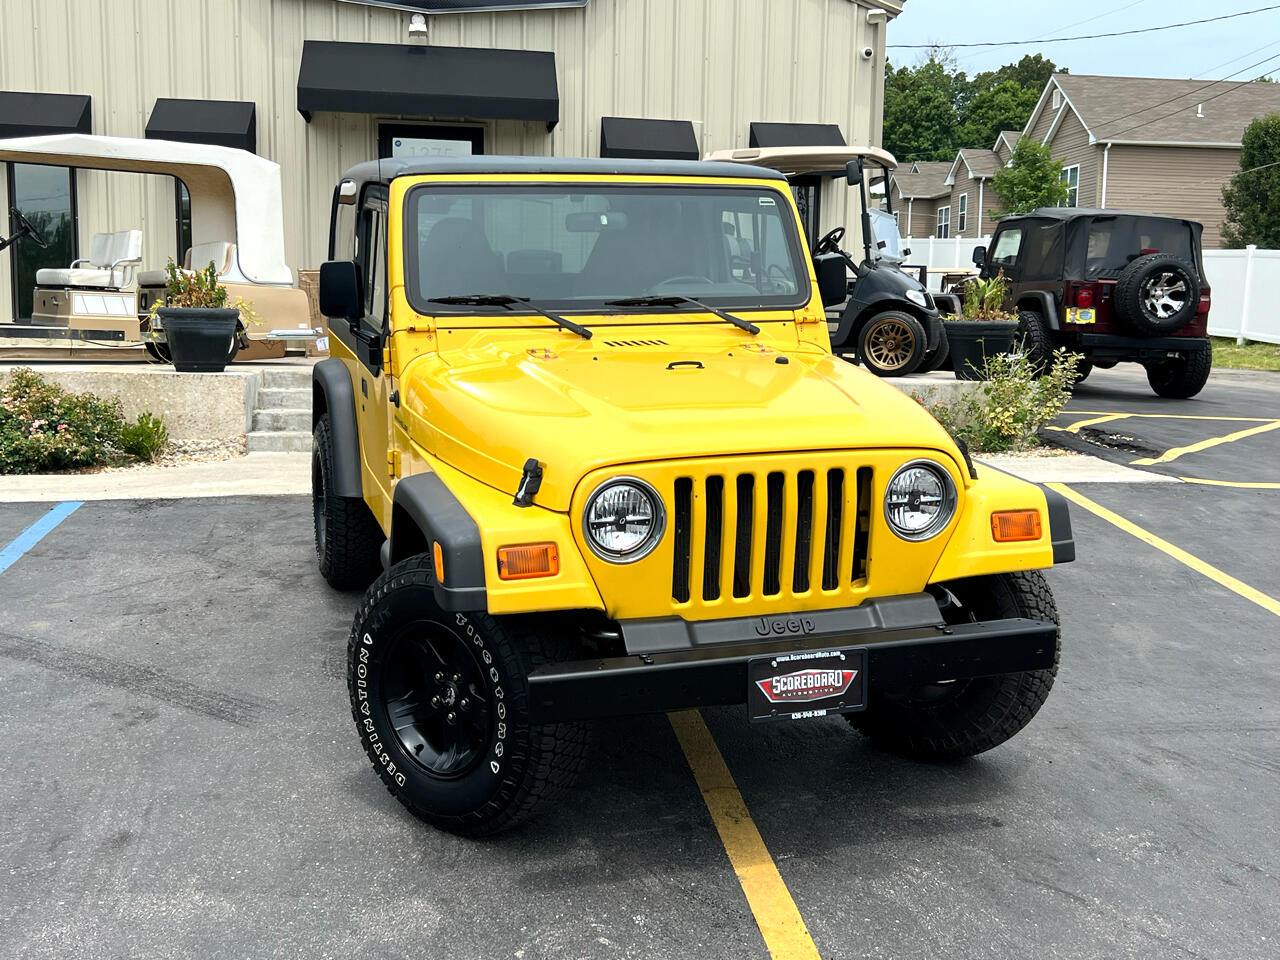 Used 2000 Jeep Wrangler 2dr SE for Sale in Eureka MO 63025 Scoreboard  Automotive Sales and Leasing